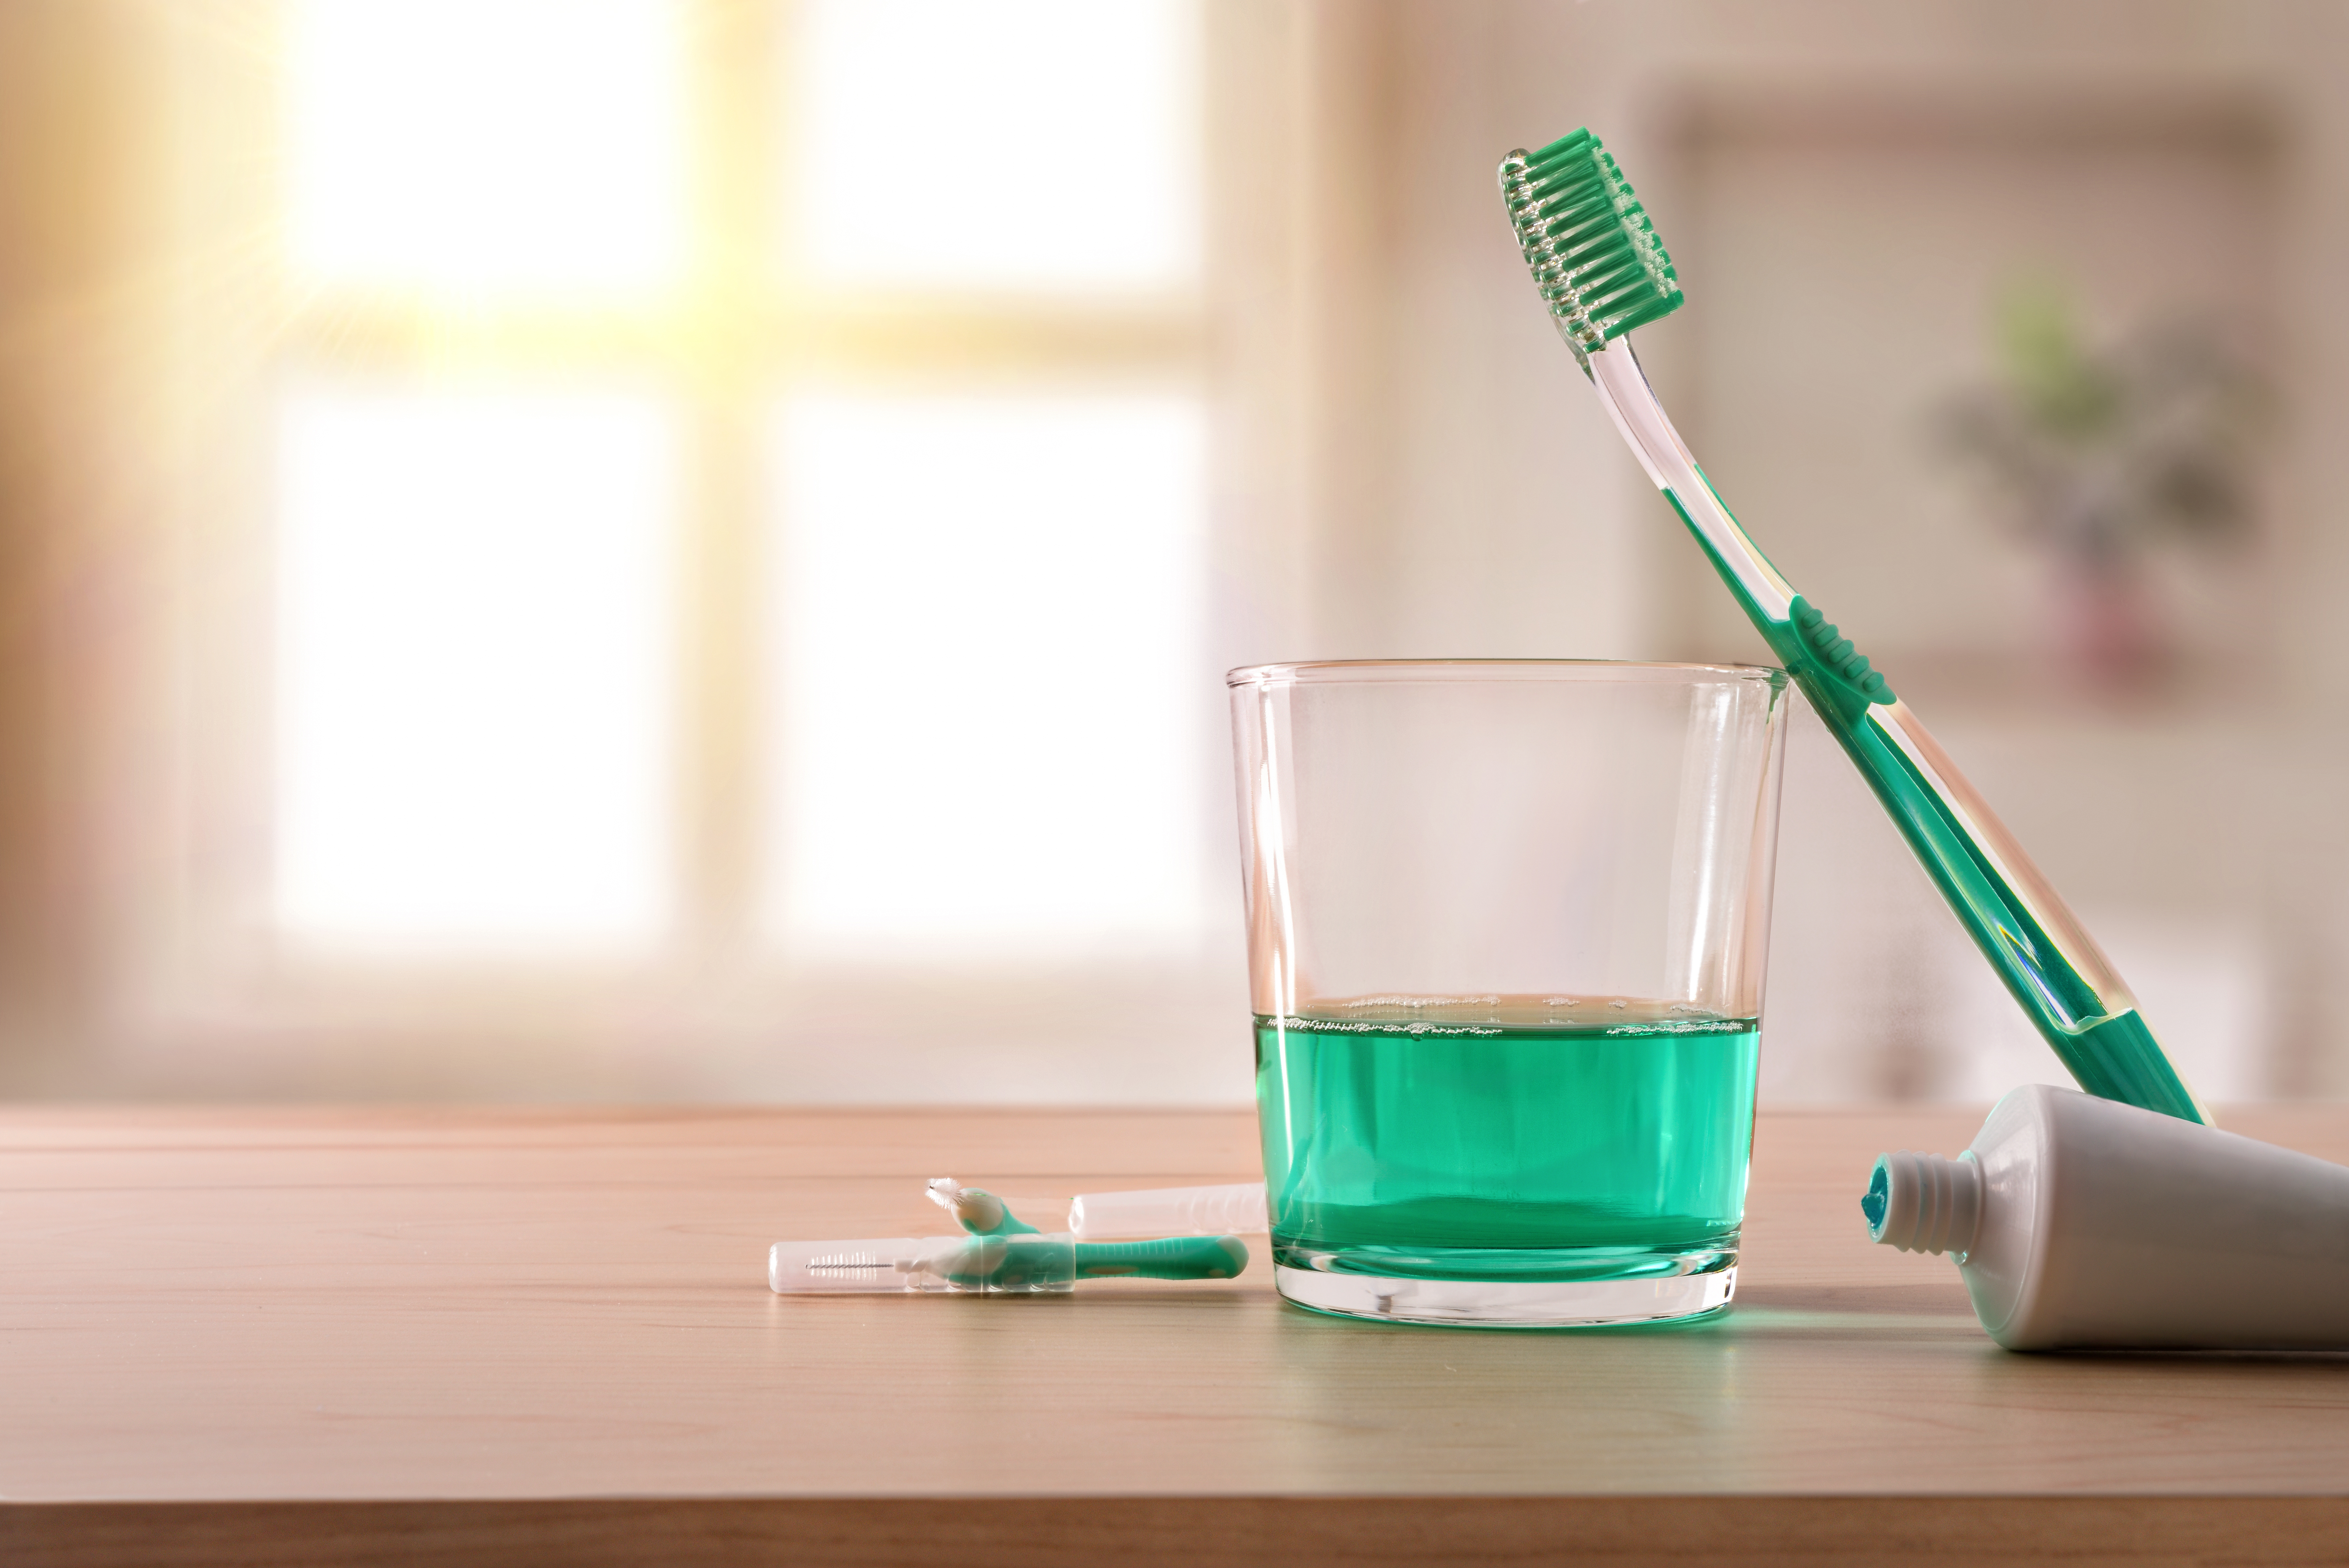 Glass of mouthwash with a toothbrush leaned against it